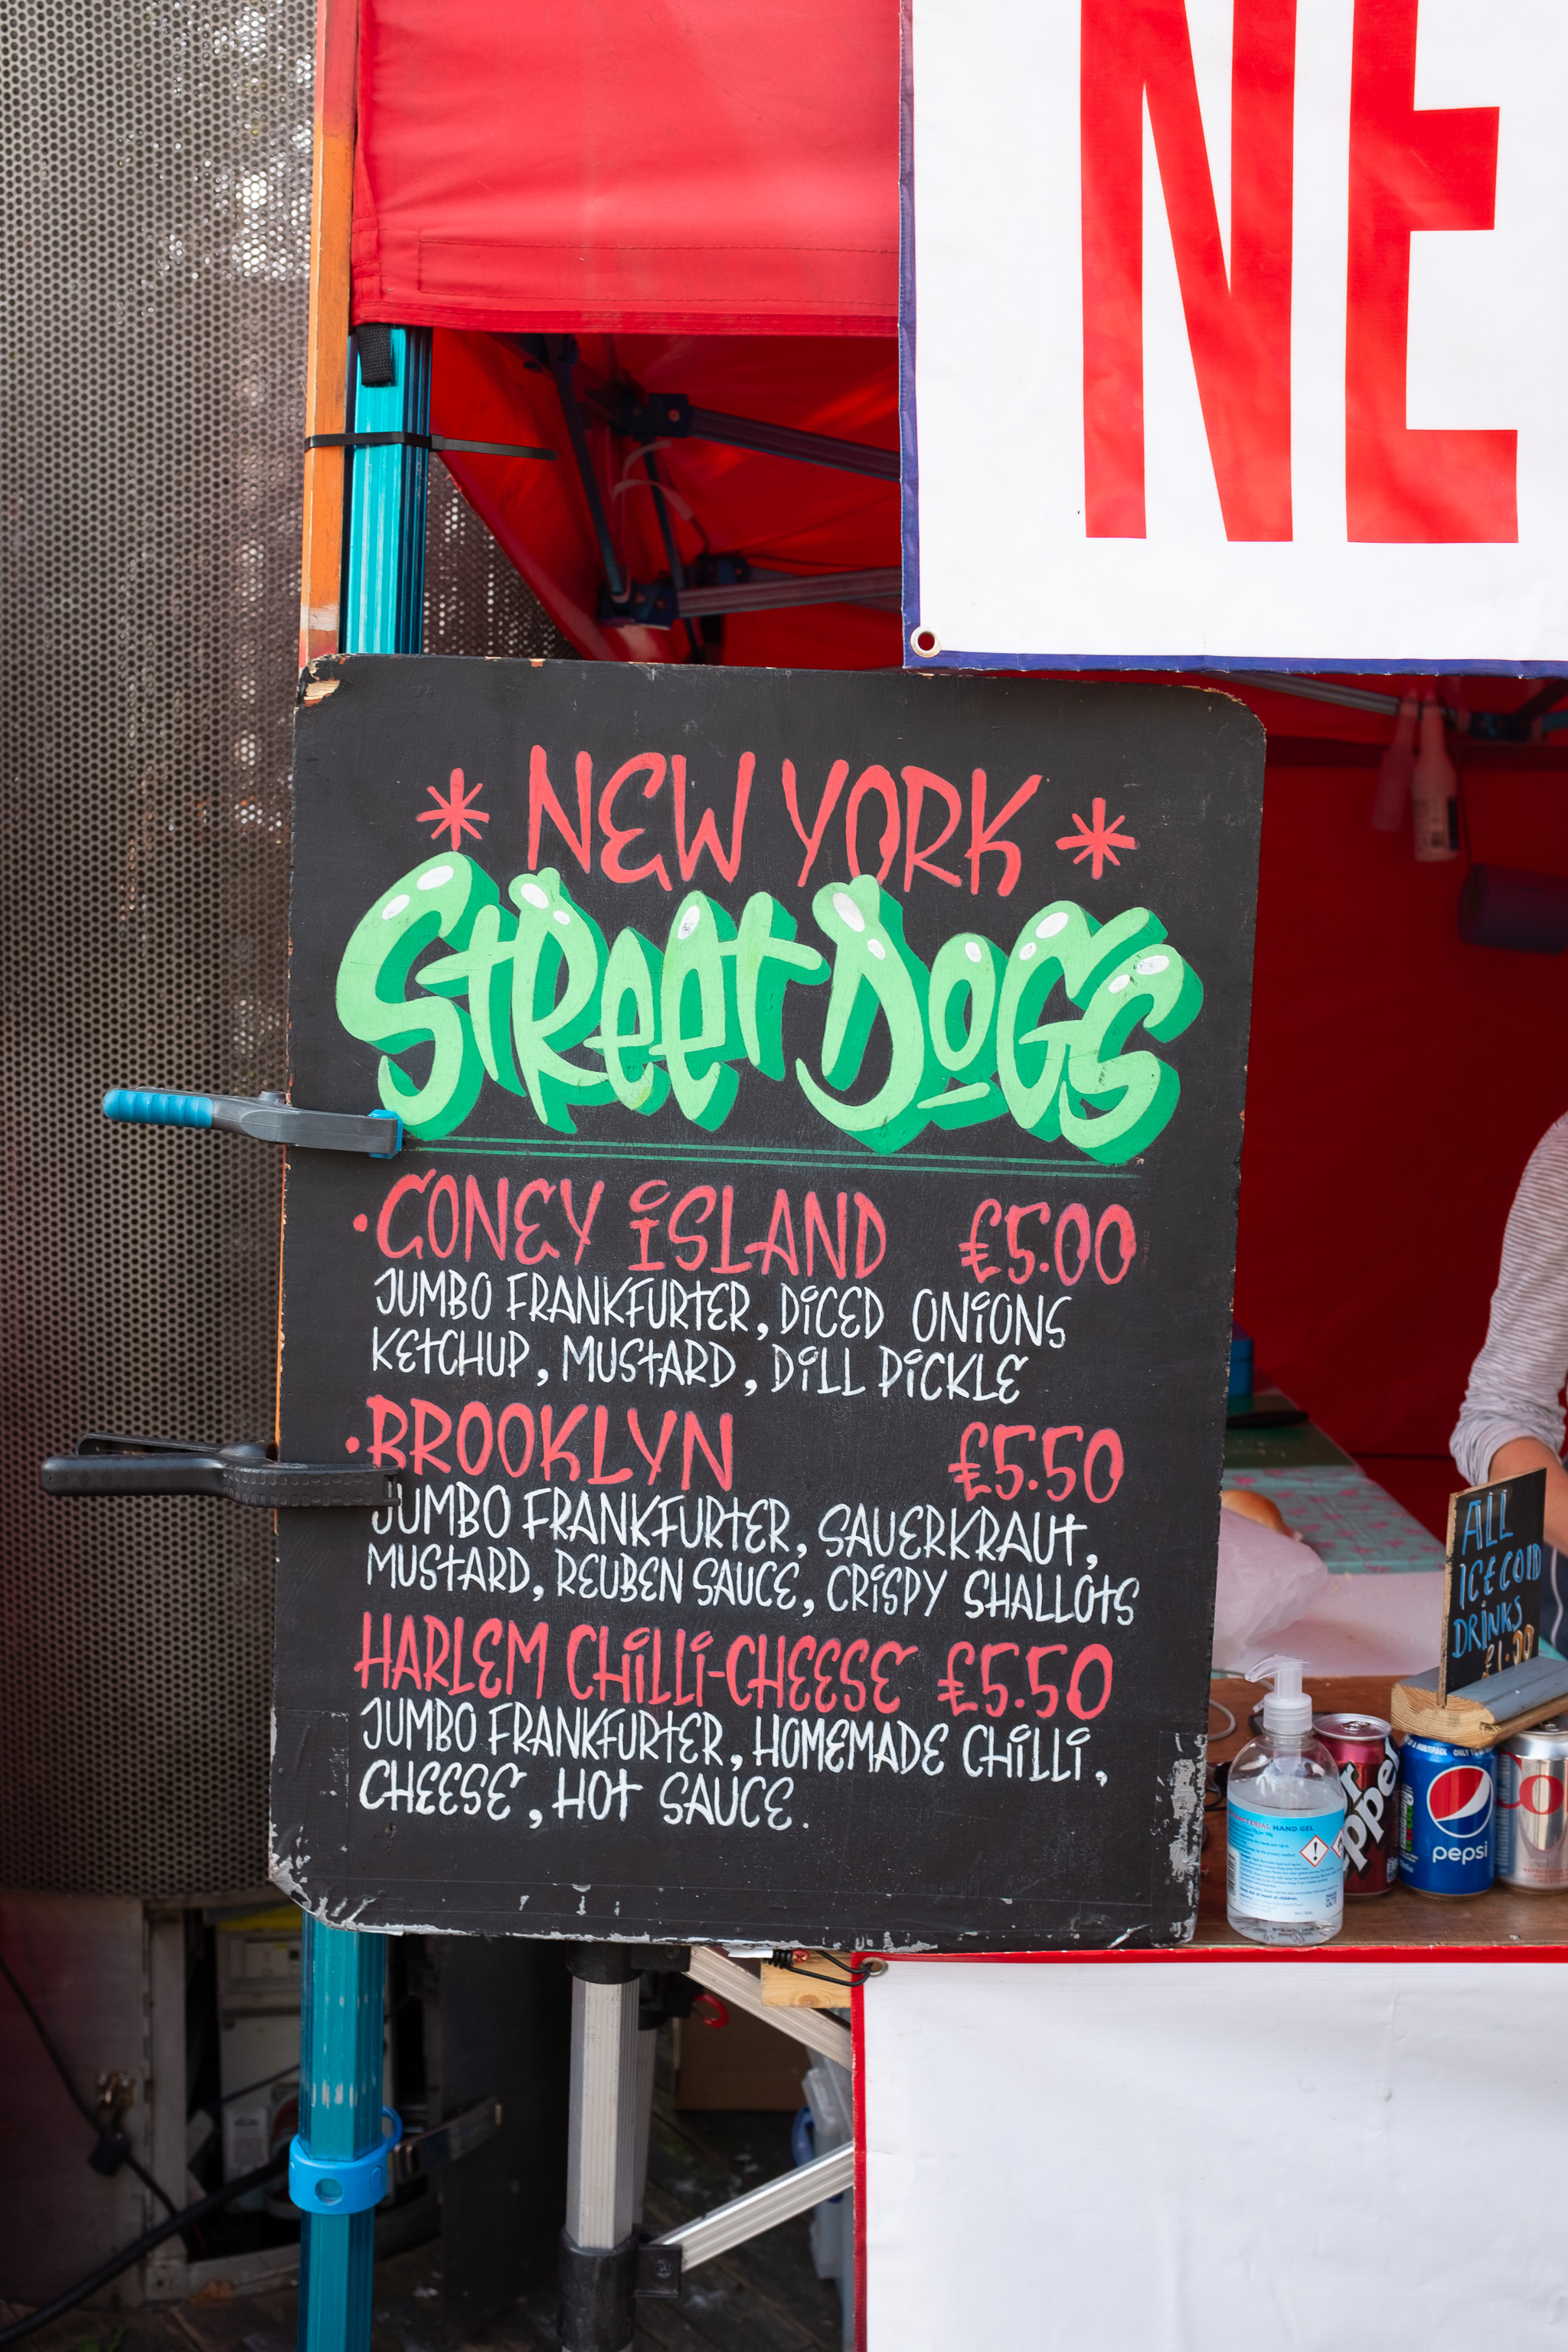 Street Dogs
I had the Brooklyn. It was good. And sizeable.
